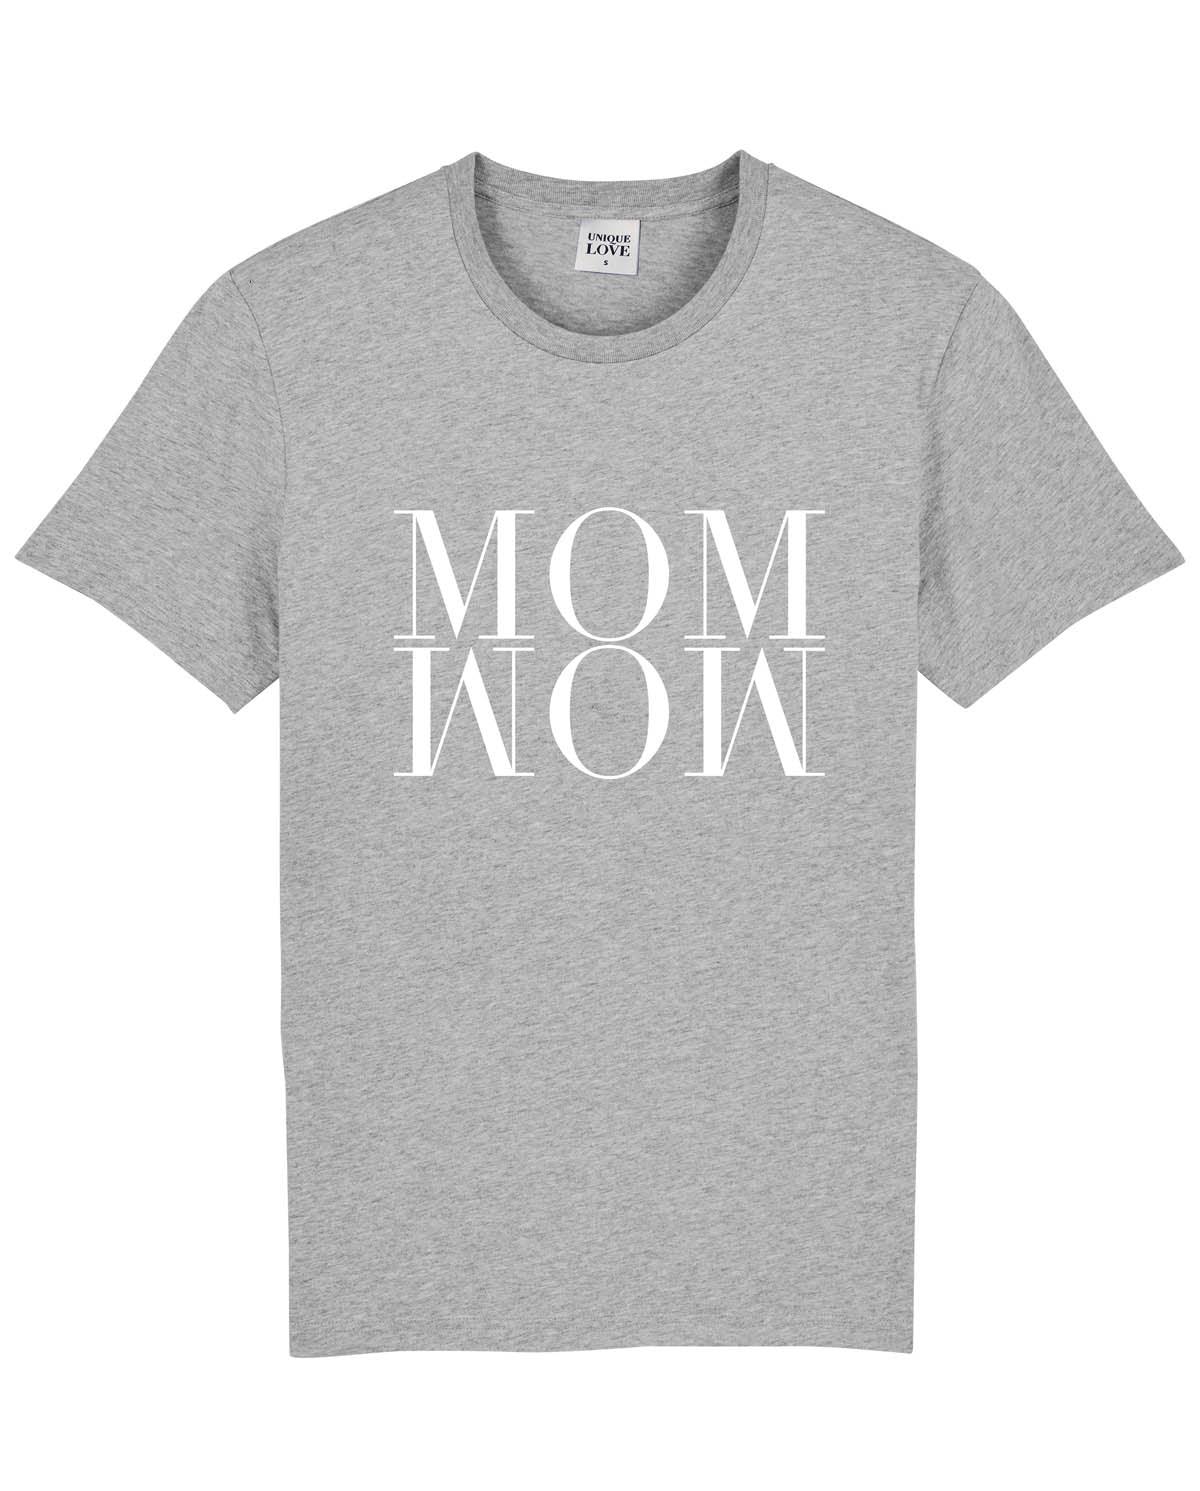 Mom T-Shirt WOW - The Little One • Family.Concept.Store. 